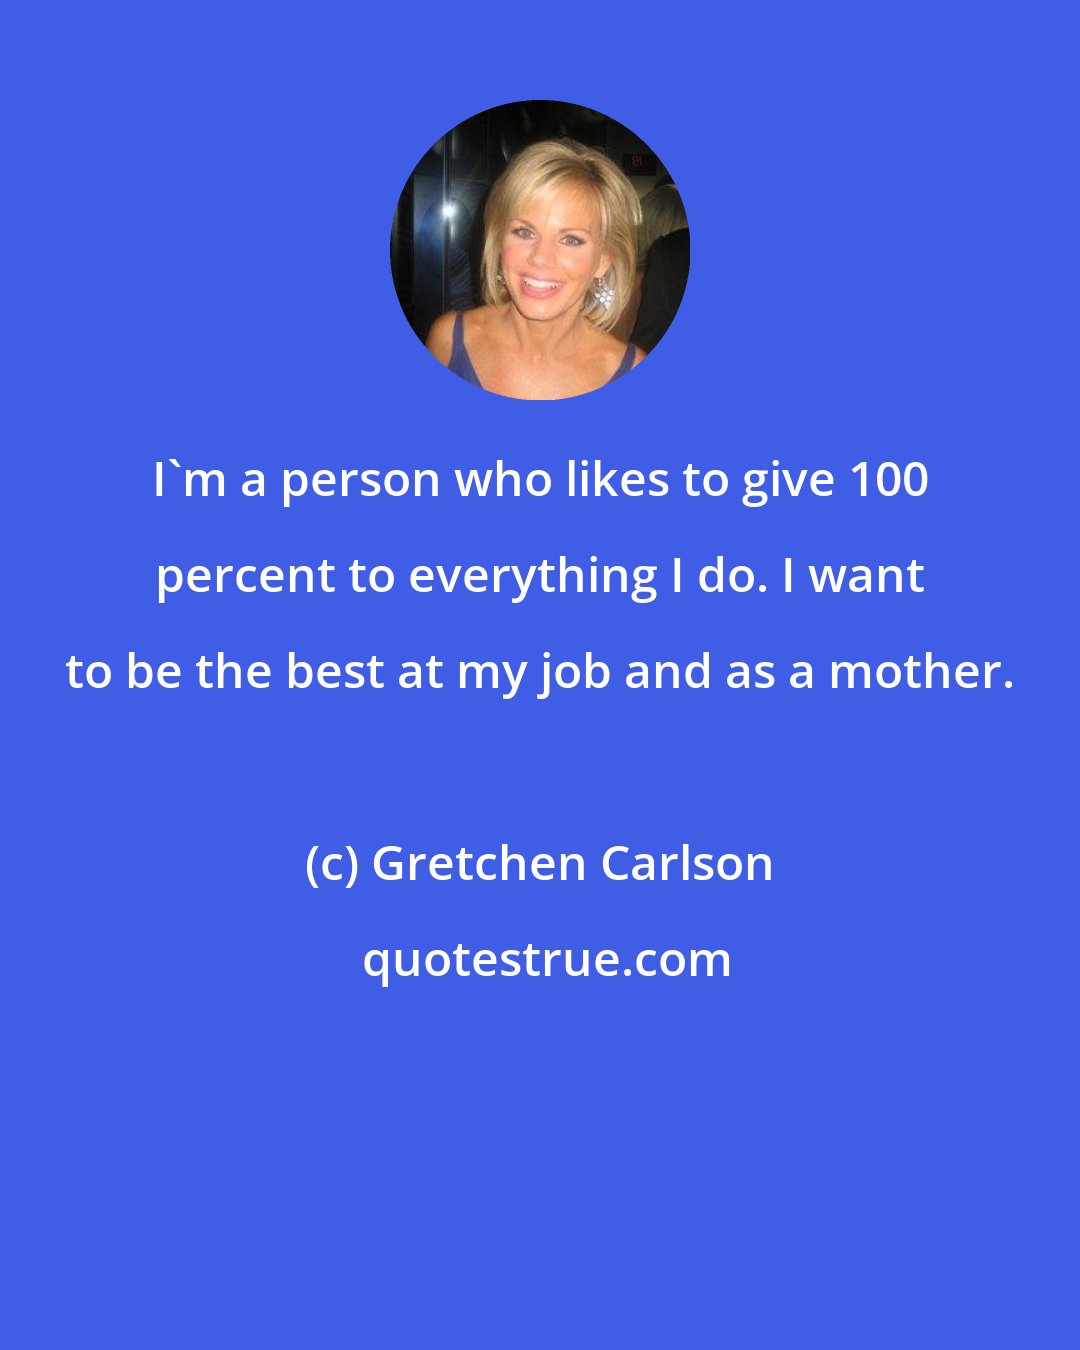 Gretchen Carlson: I'm a person who likes to give 100 percent to everything I do. I want to be the best at my job and as a mother.